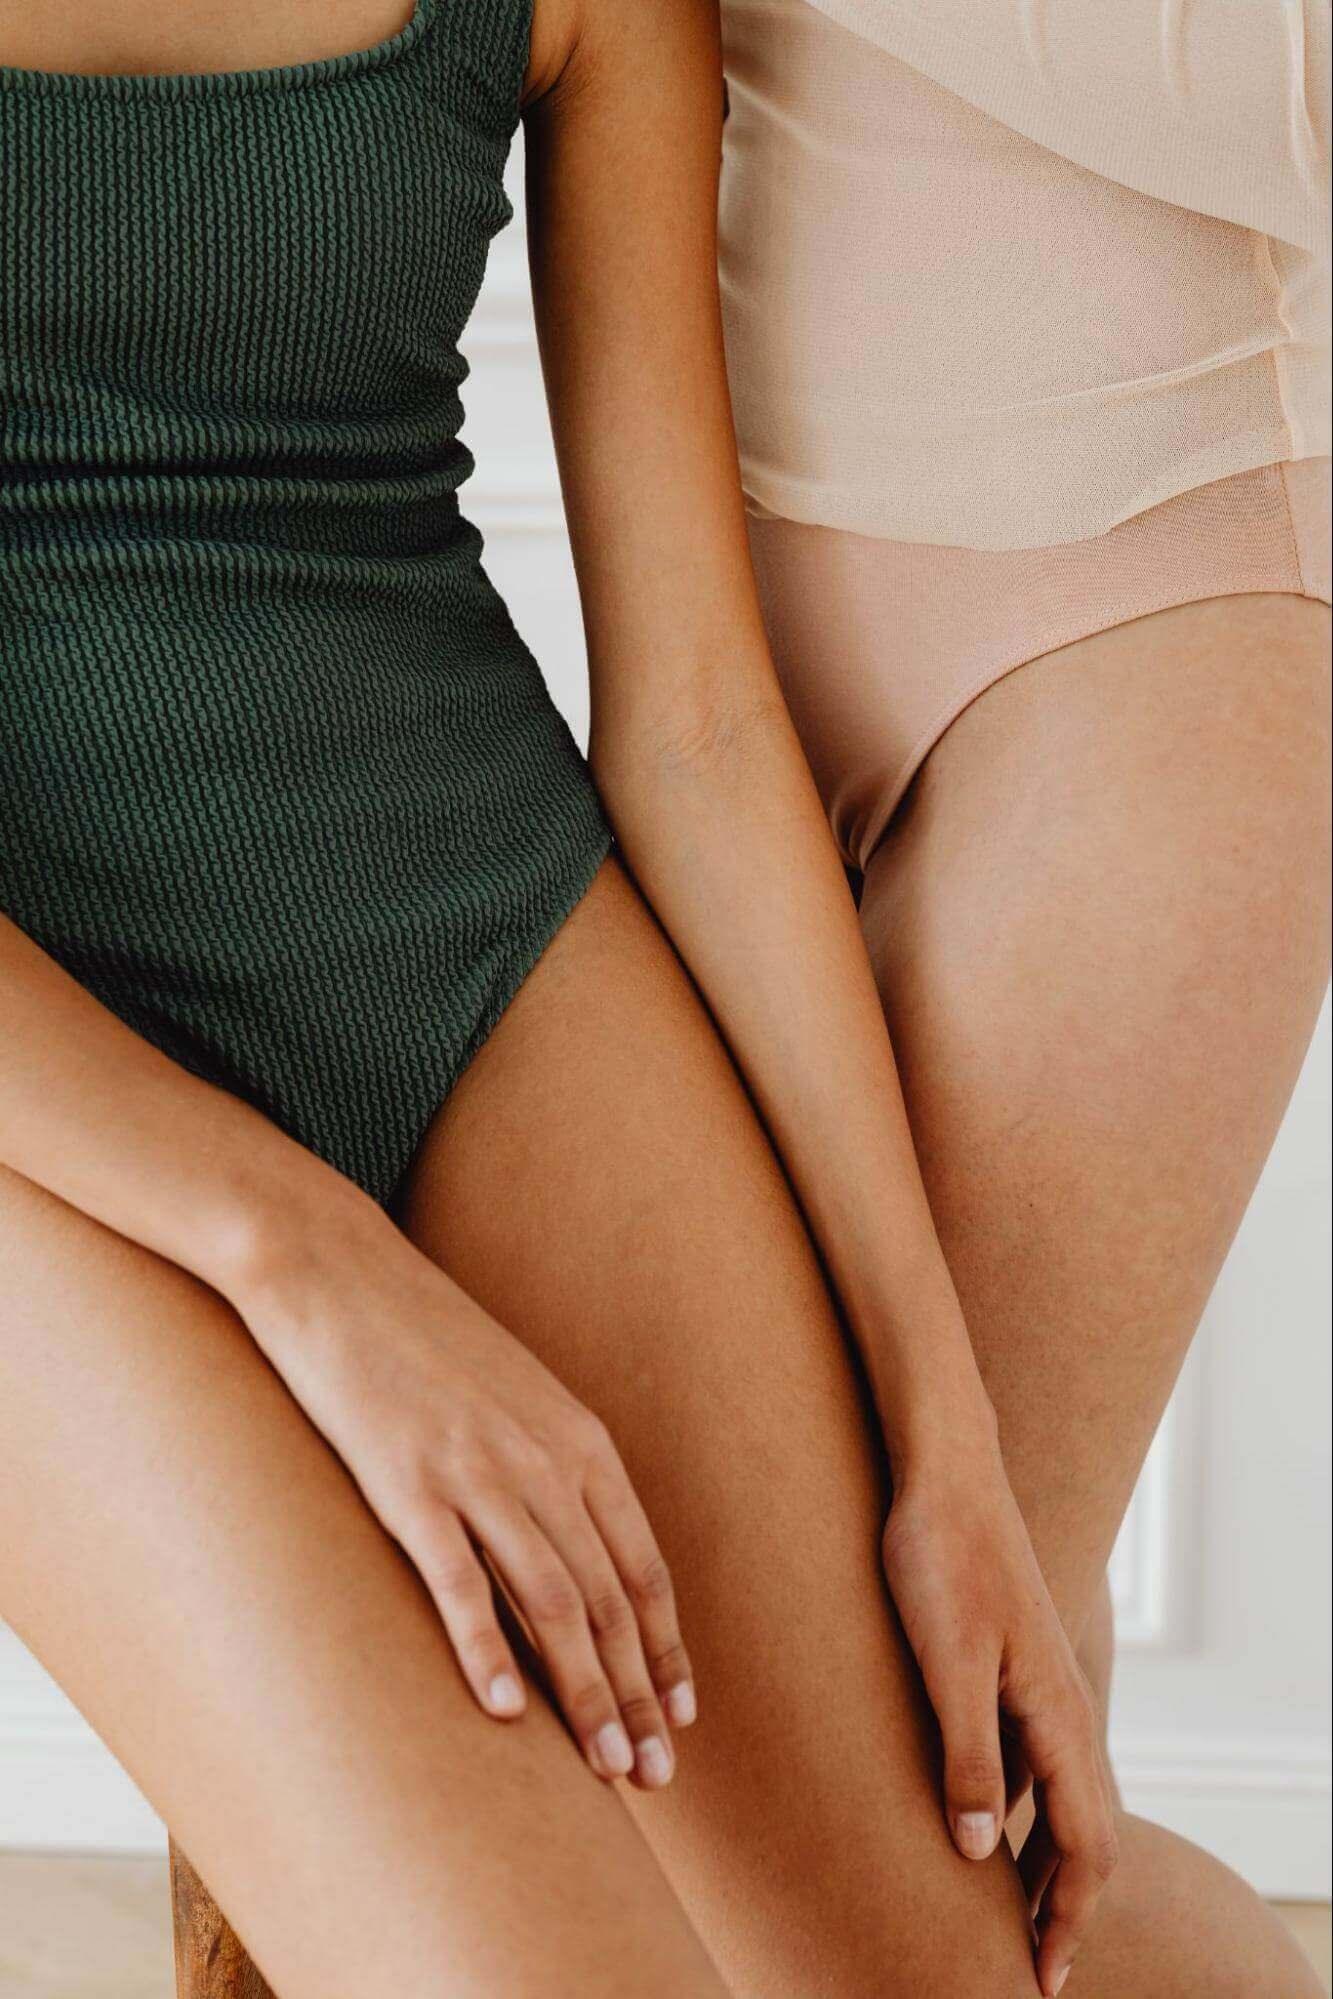 What Are the Benefits of Shapewear? - The Natural Posture